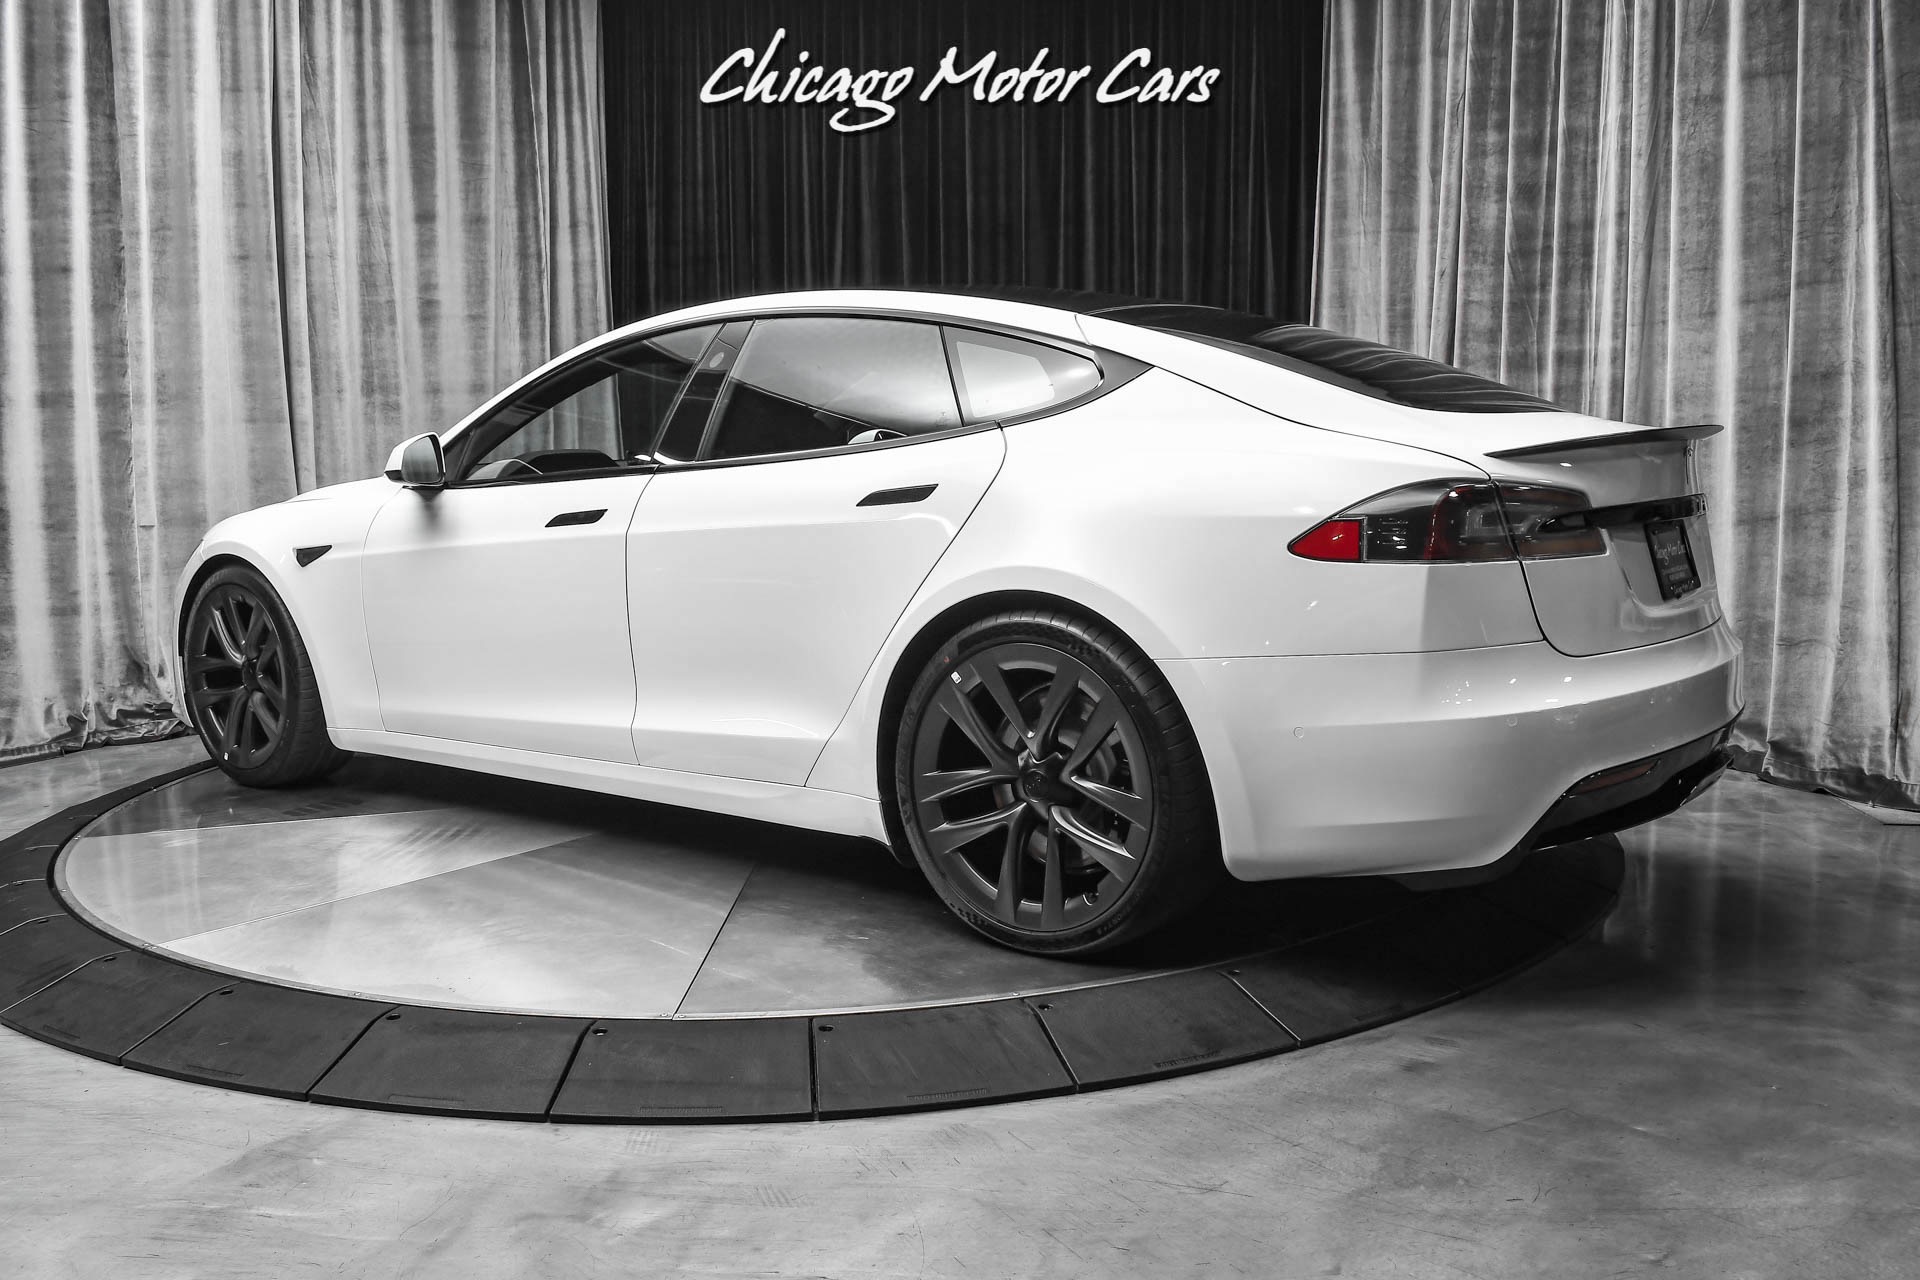 Used-2021-Tesla-Model-S-Plaid-FULL-SELF-DRIVING-ONLY-2K-Miles-0-60-in-199-Seconds-LOADED